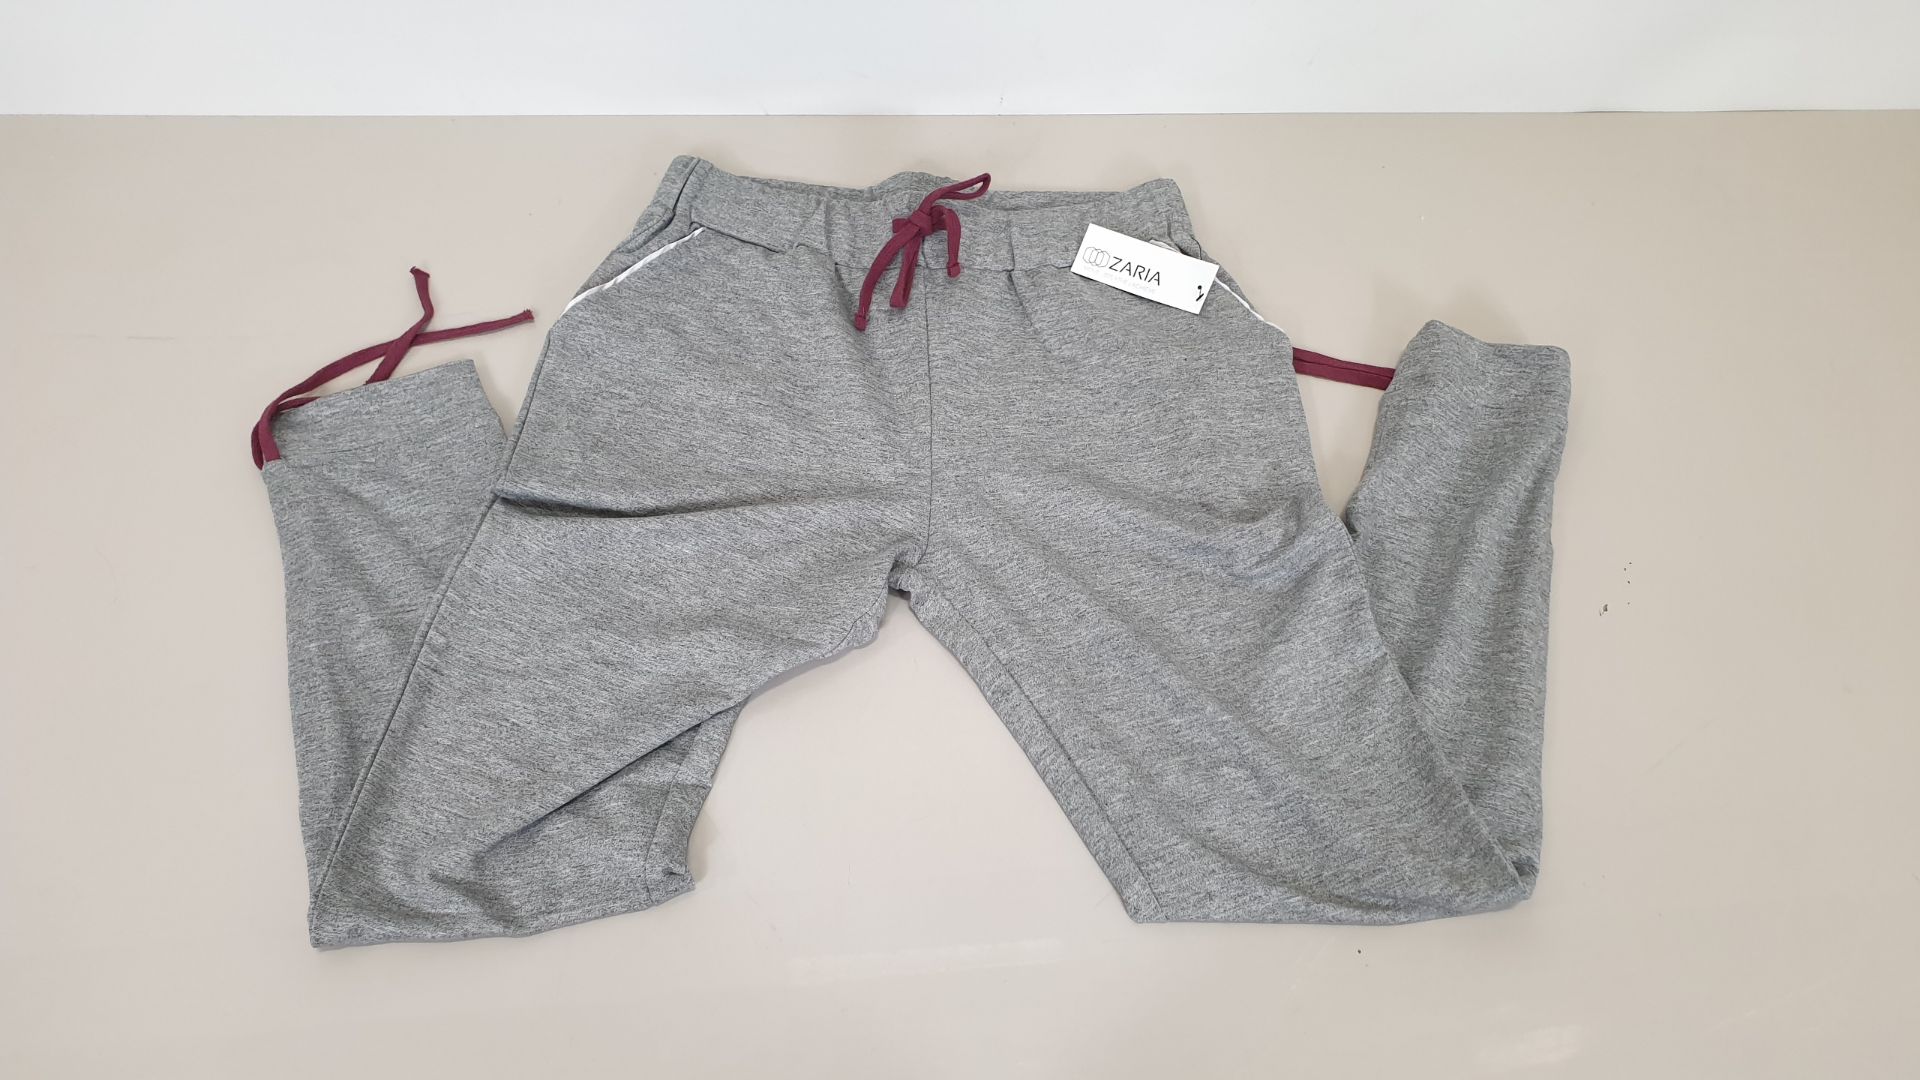 18 X BRAND NEW AVON ZARIA JOGGERS - RRP £18.95 EACH (TOTAL £341) - SIZE 10-12 - IN 1 BOX